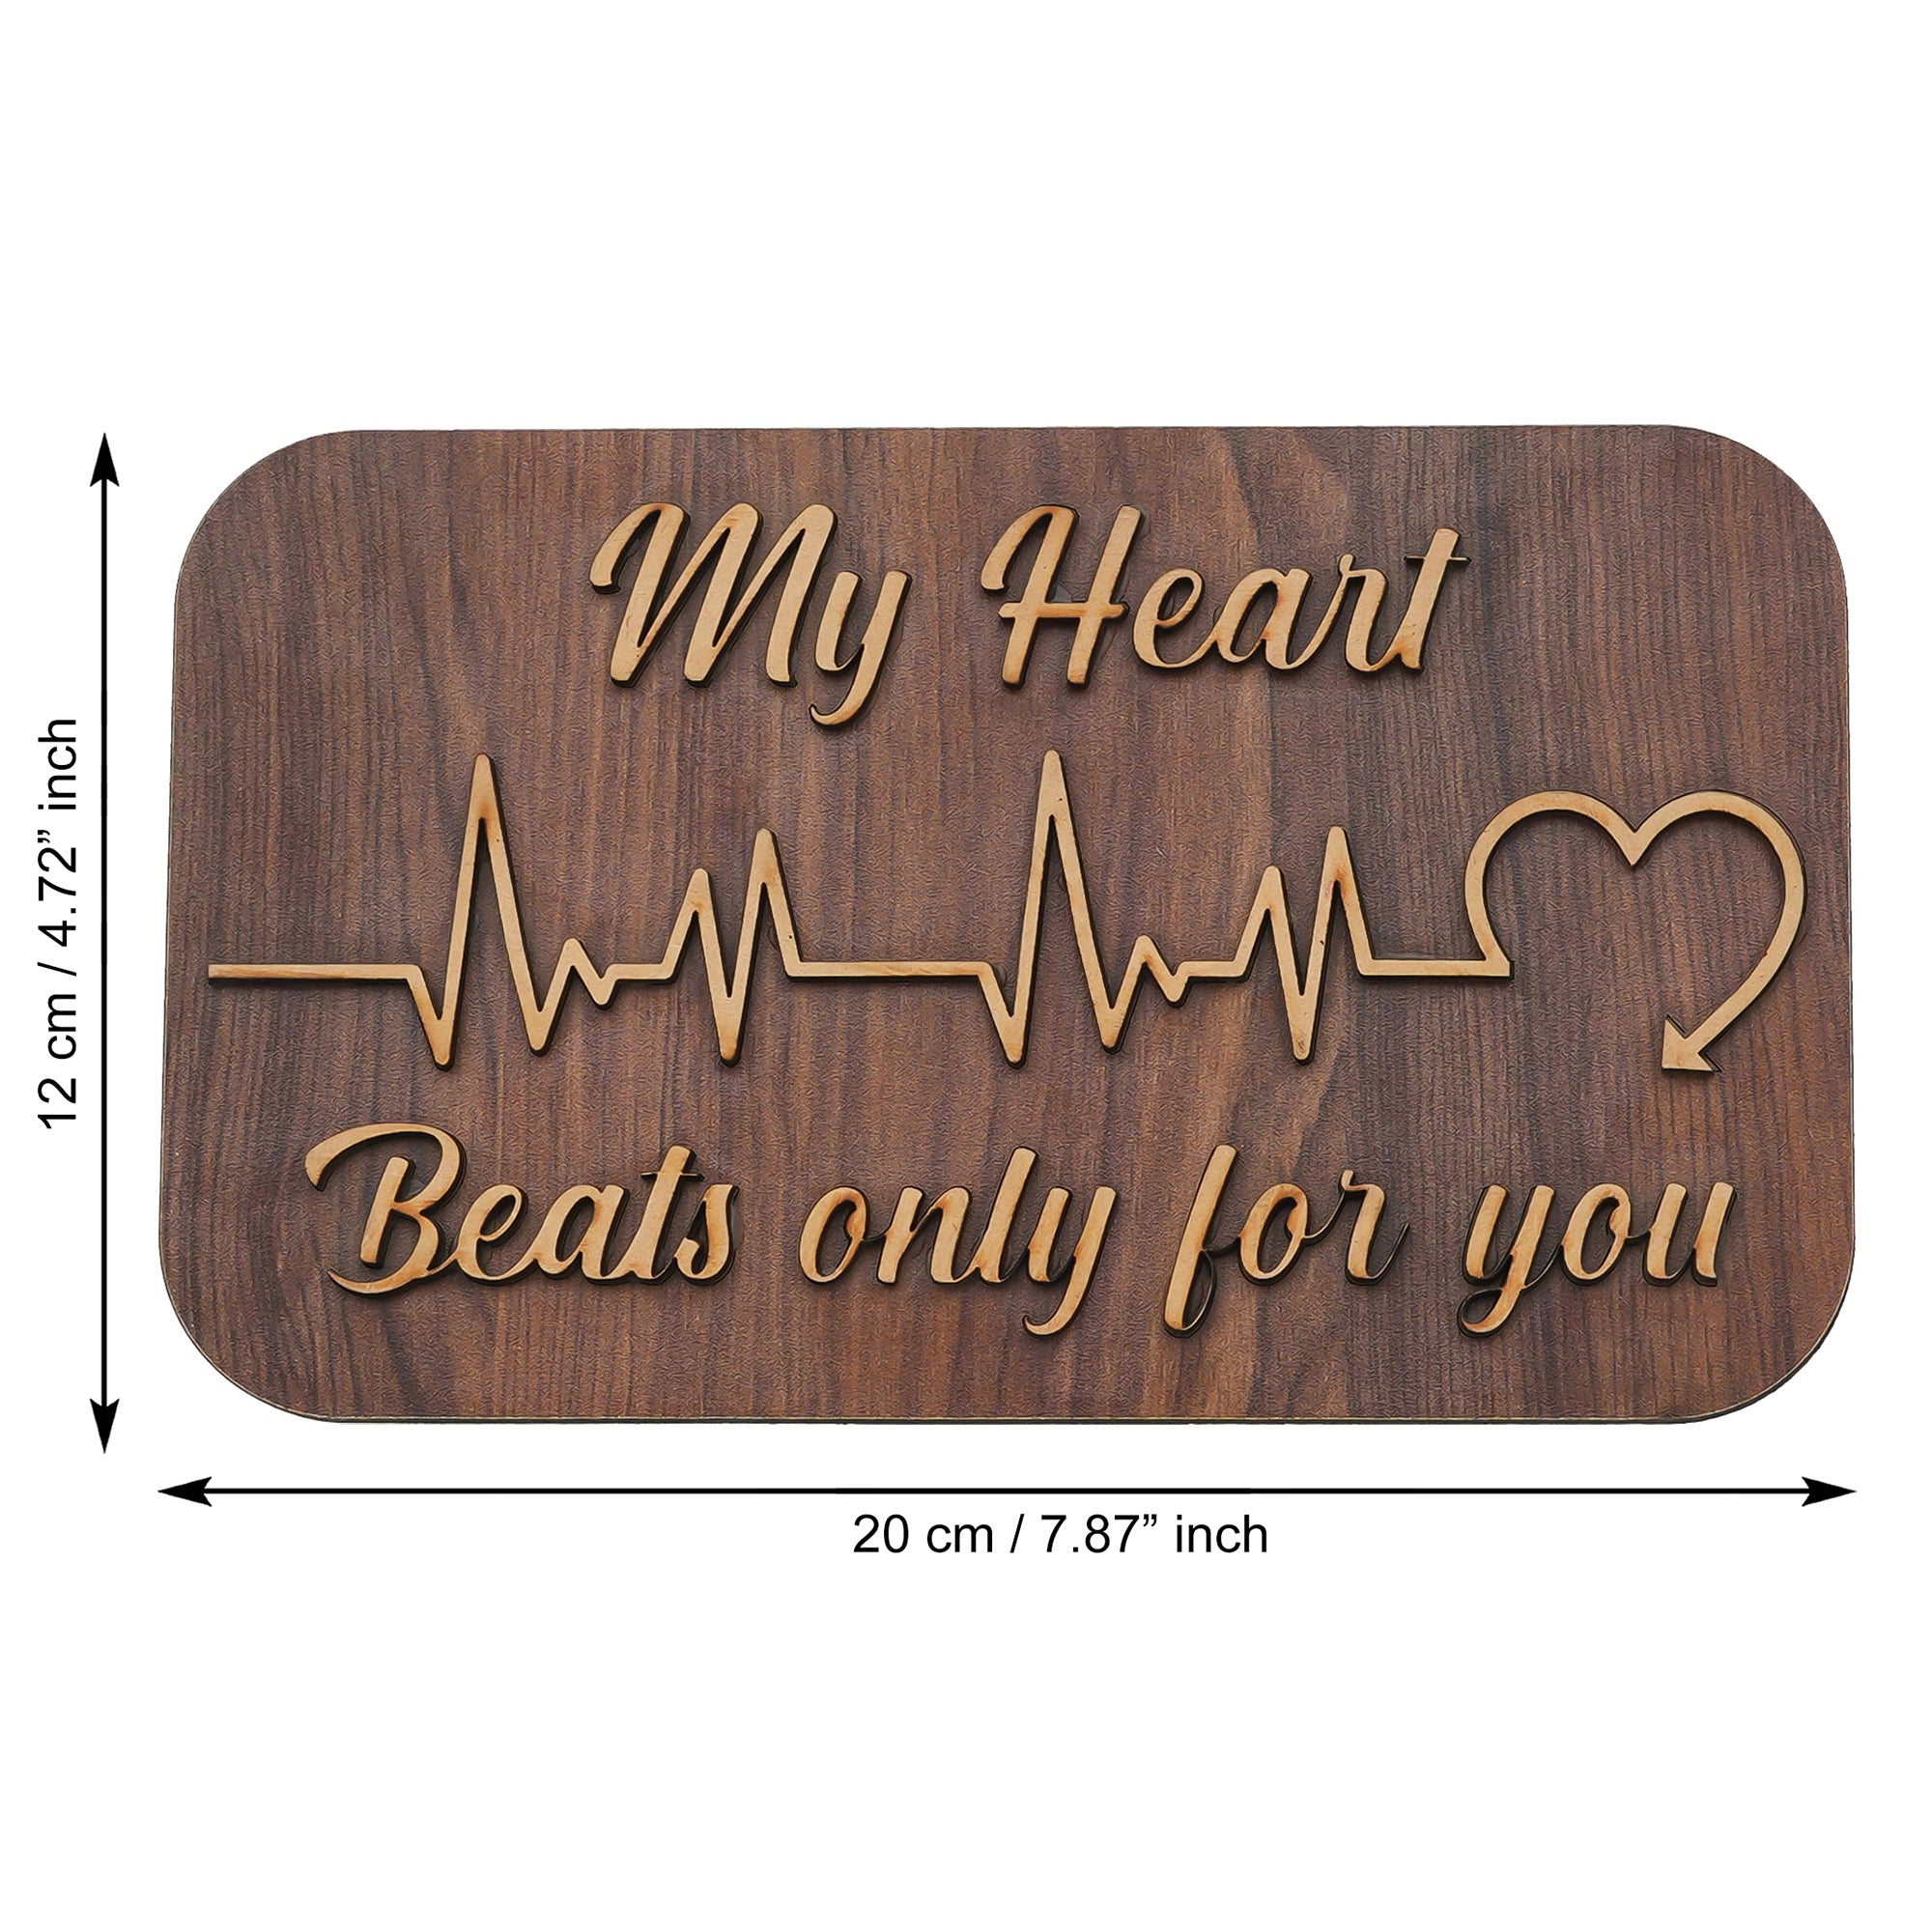 Valentine Combo of Set of 8 Love Post Cards Gift Cards Set, "My Heart Beats Only For You" Wooden Showpiece With Stand, Pink Heart Shaped Gift Box with Teddy and Roses 4